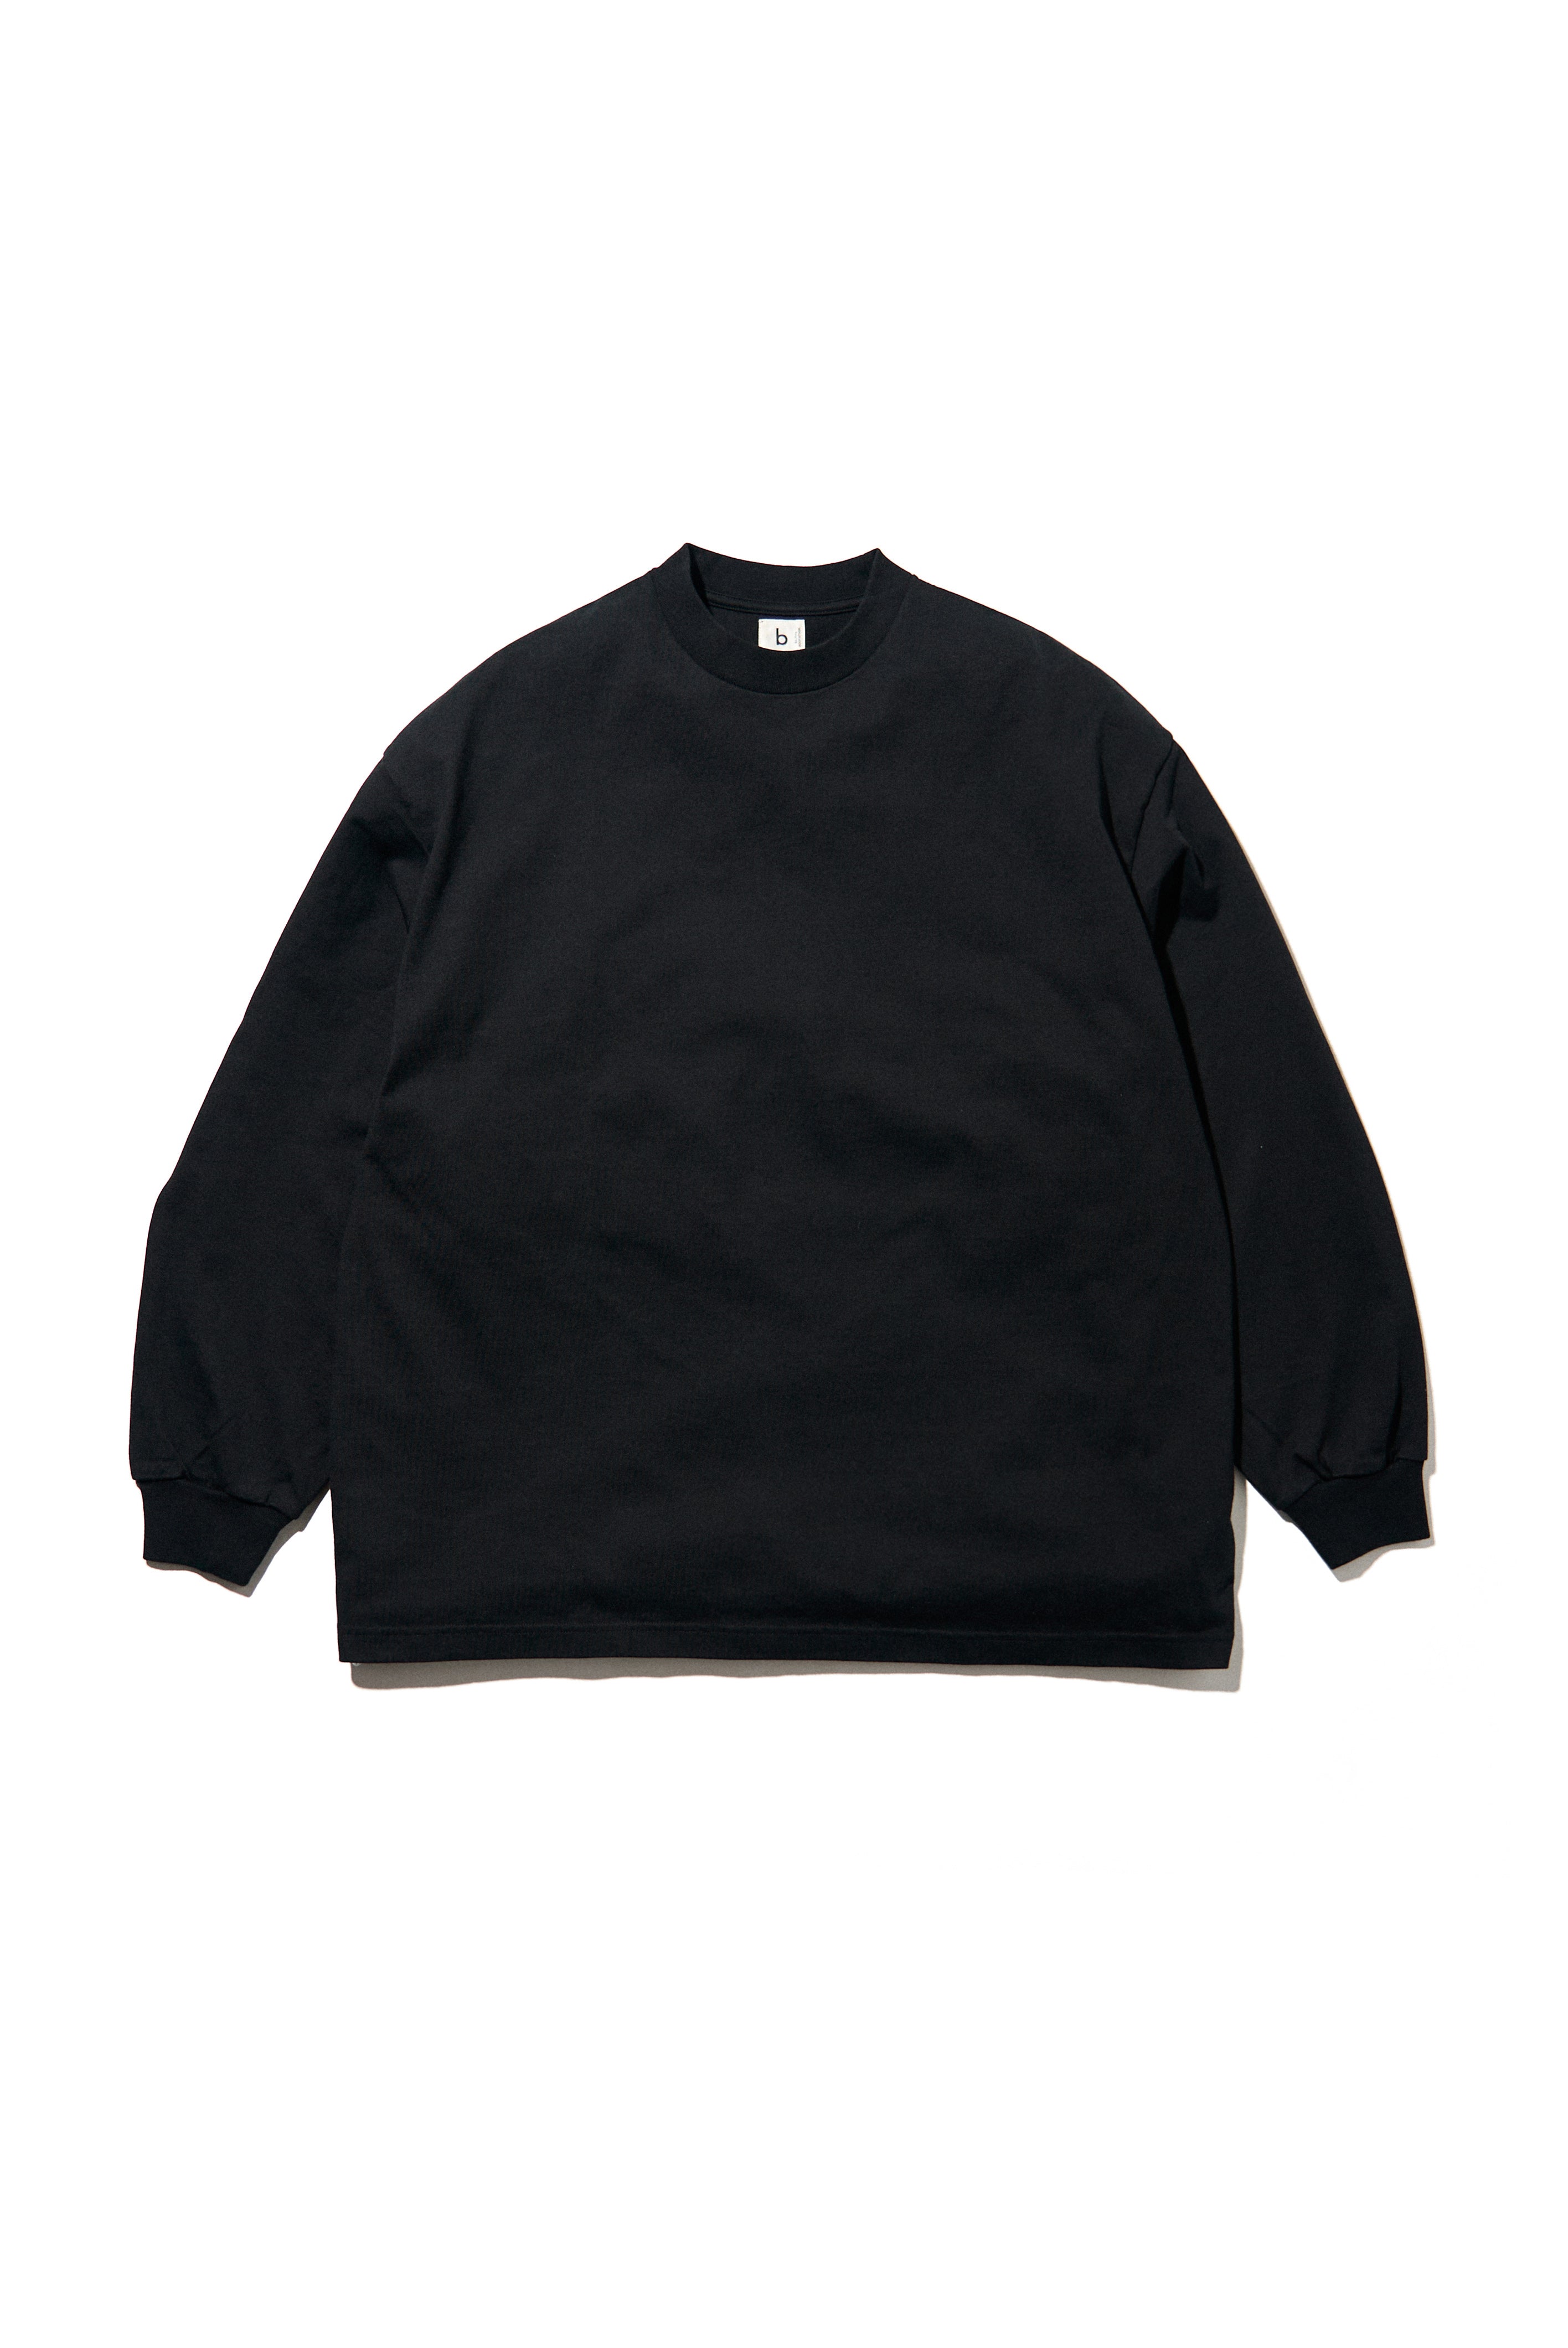 blurhmsROOTSTOCK for FreshService L/S Tee – FreshService® official site